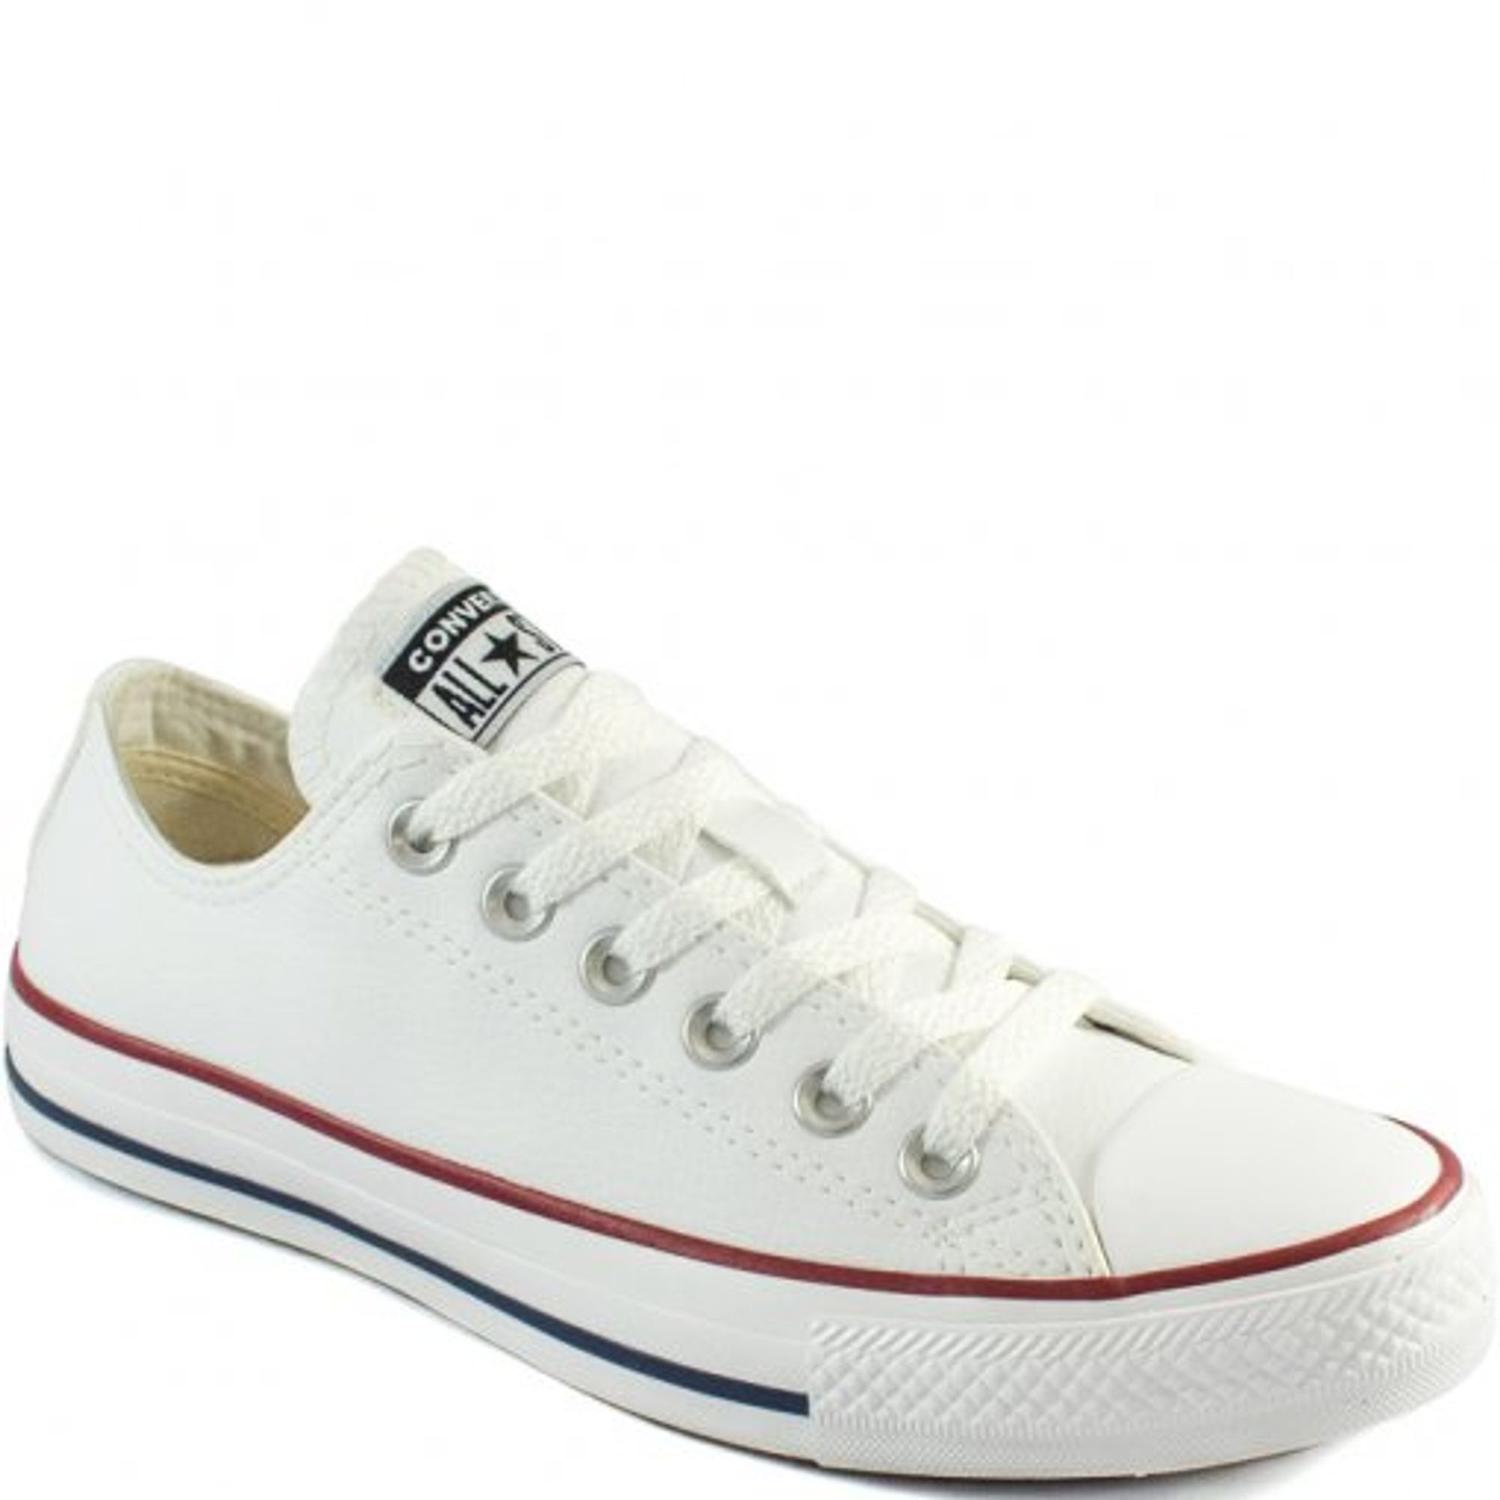 converse craft ox womens leather trainers - branco